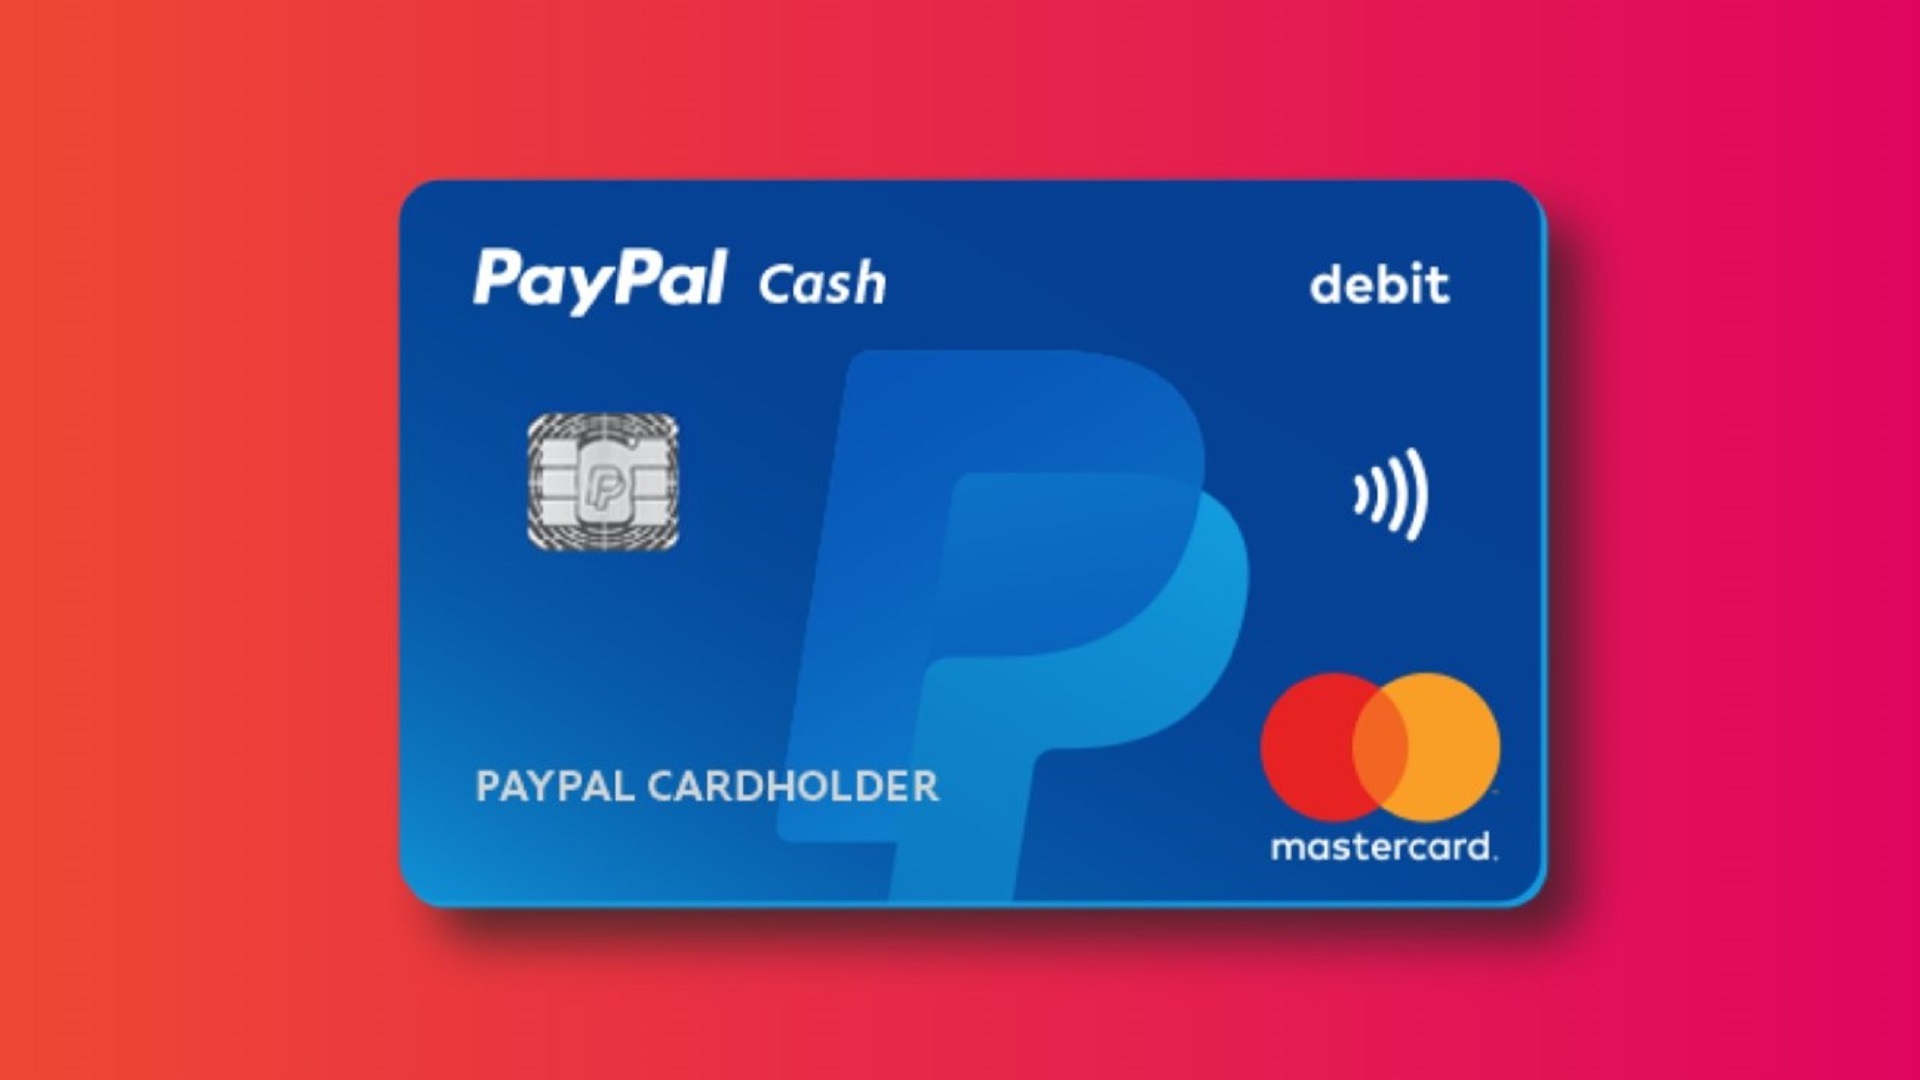 How to use PayPal Cash Card on Amazon